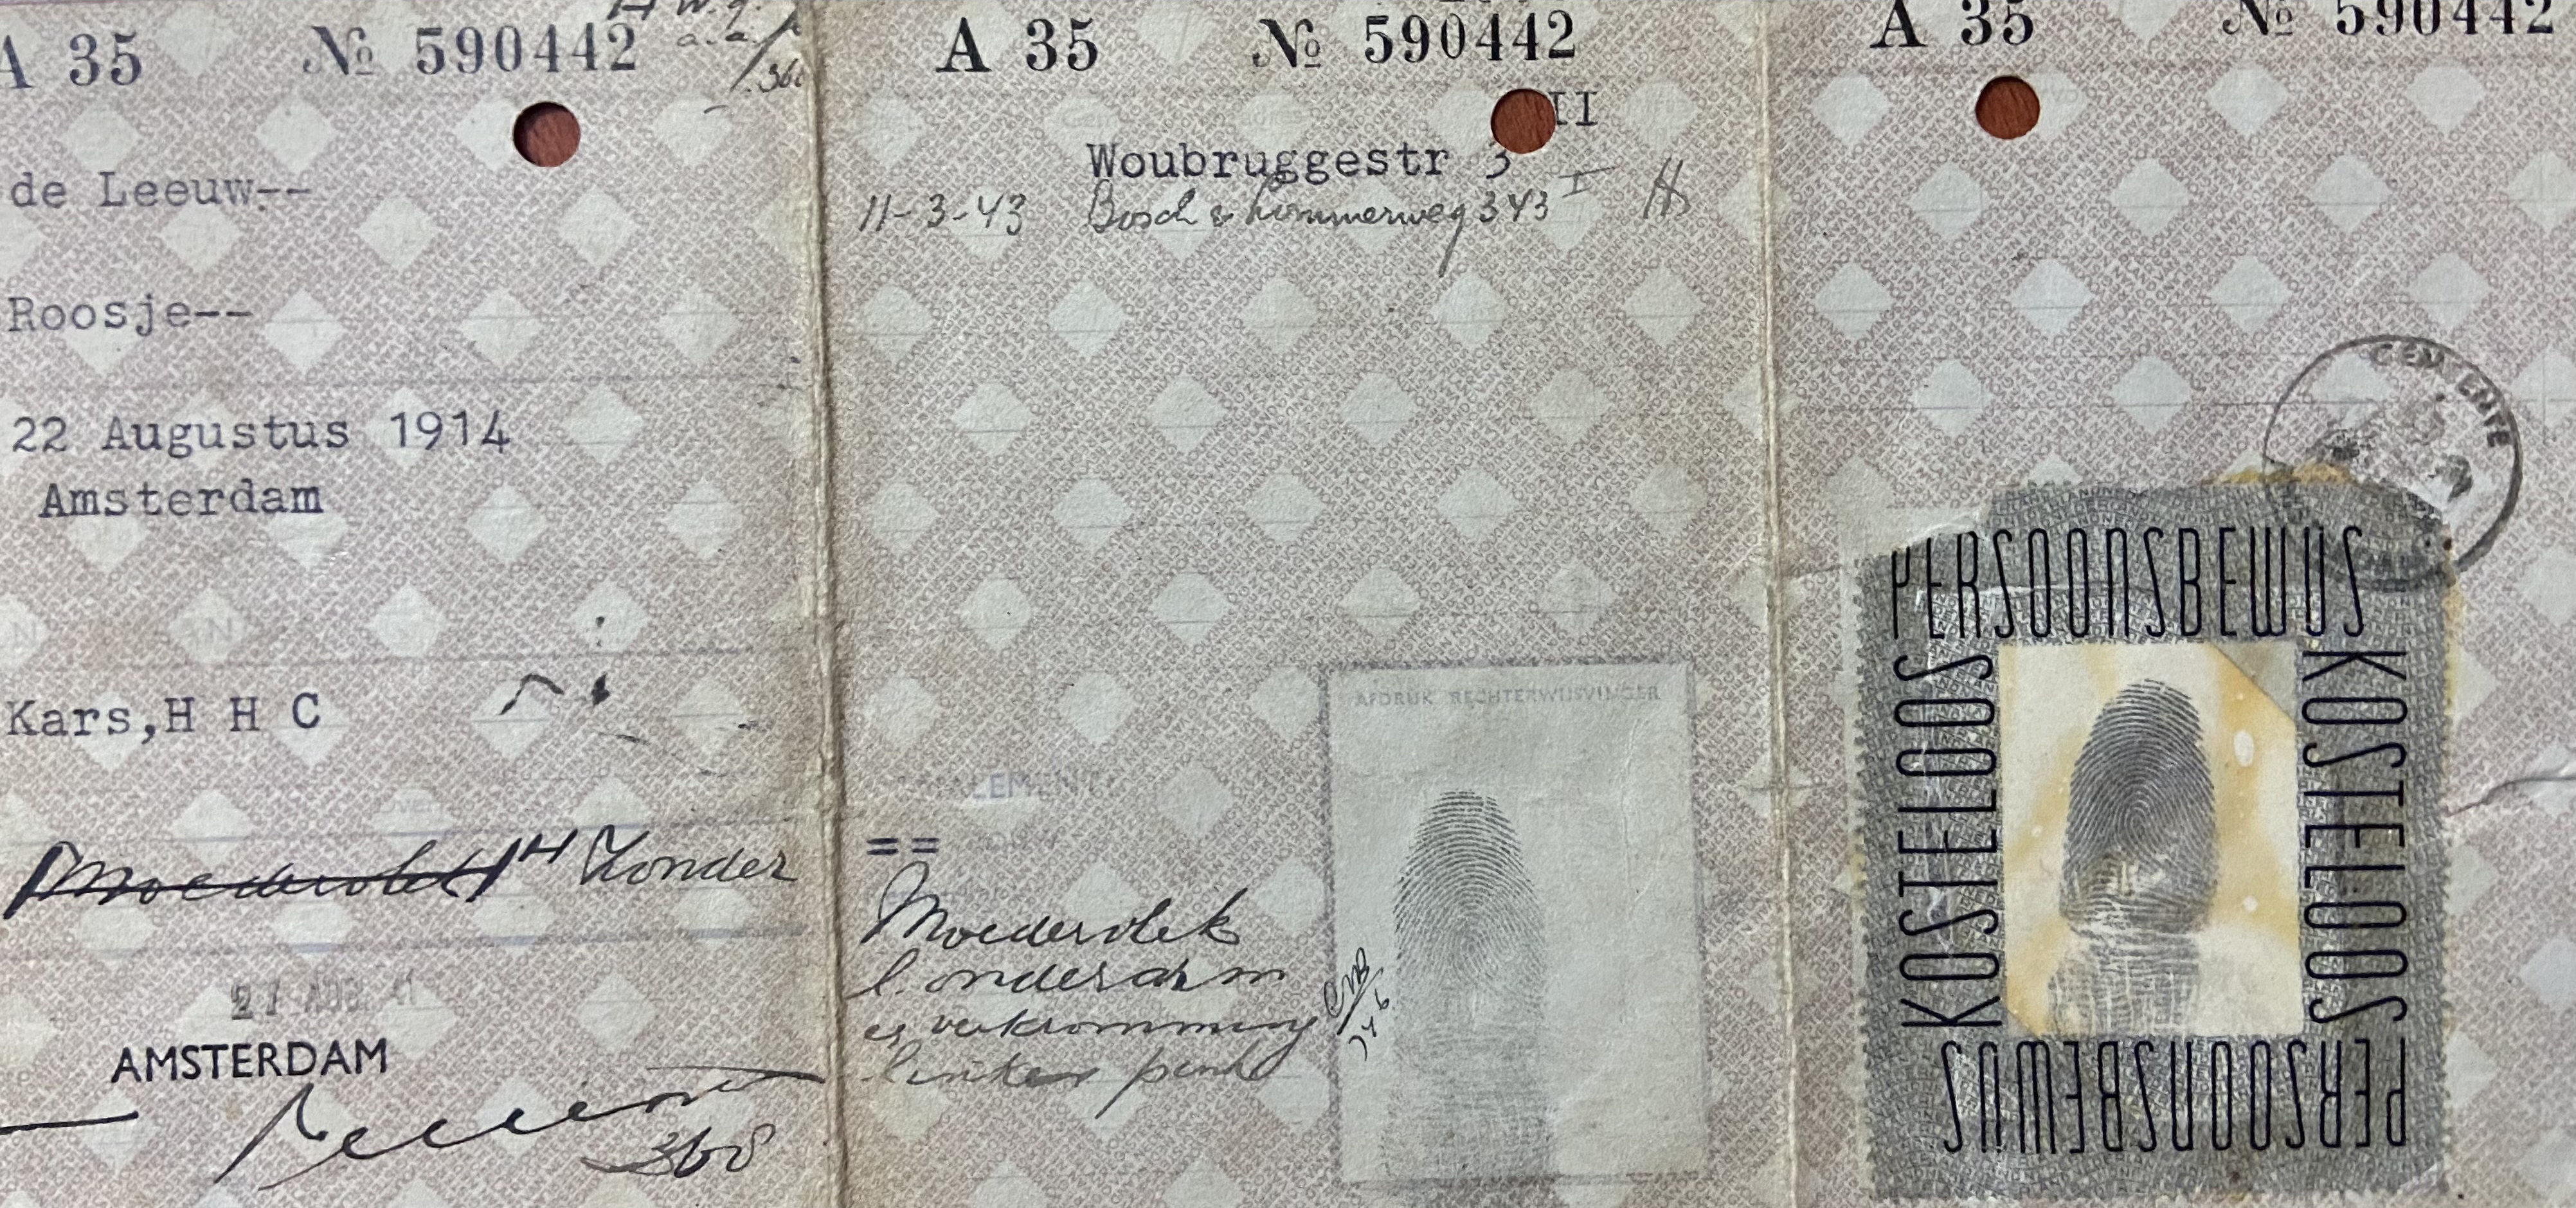 Shaul's mother’s Nazi-regime identity card, marked with the letter “J” indicating that the bearer is a Jew.